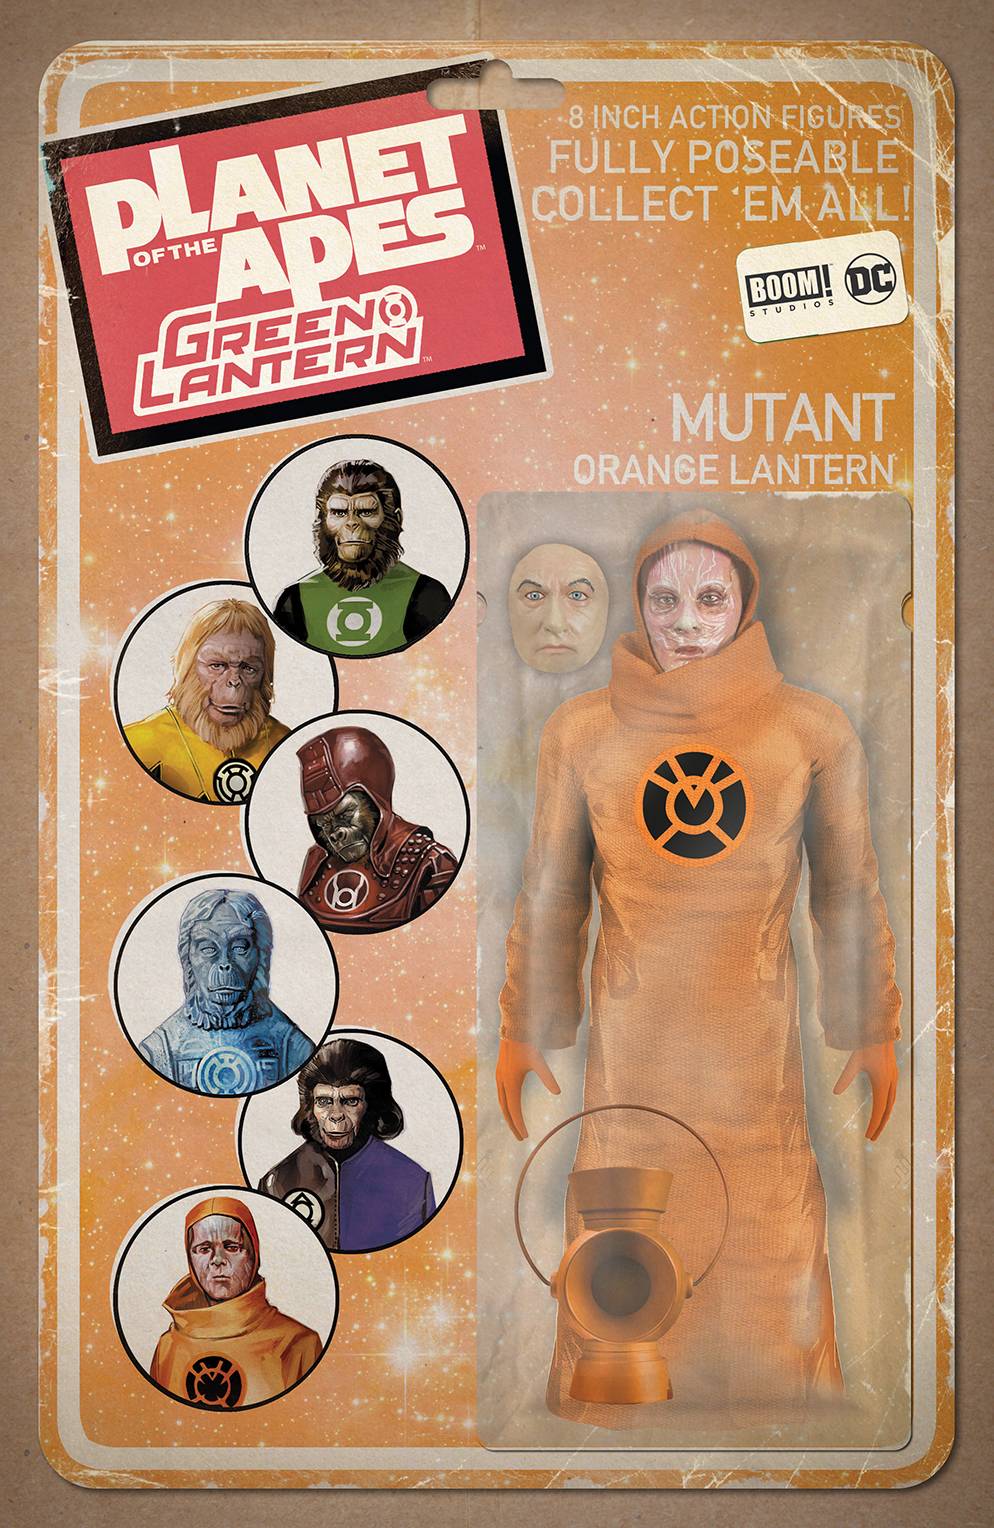 PLANET OF THE APES/GREEN LANTERN#6